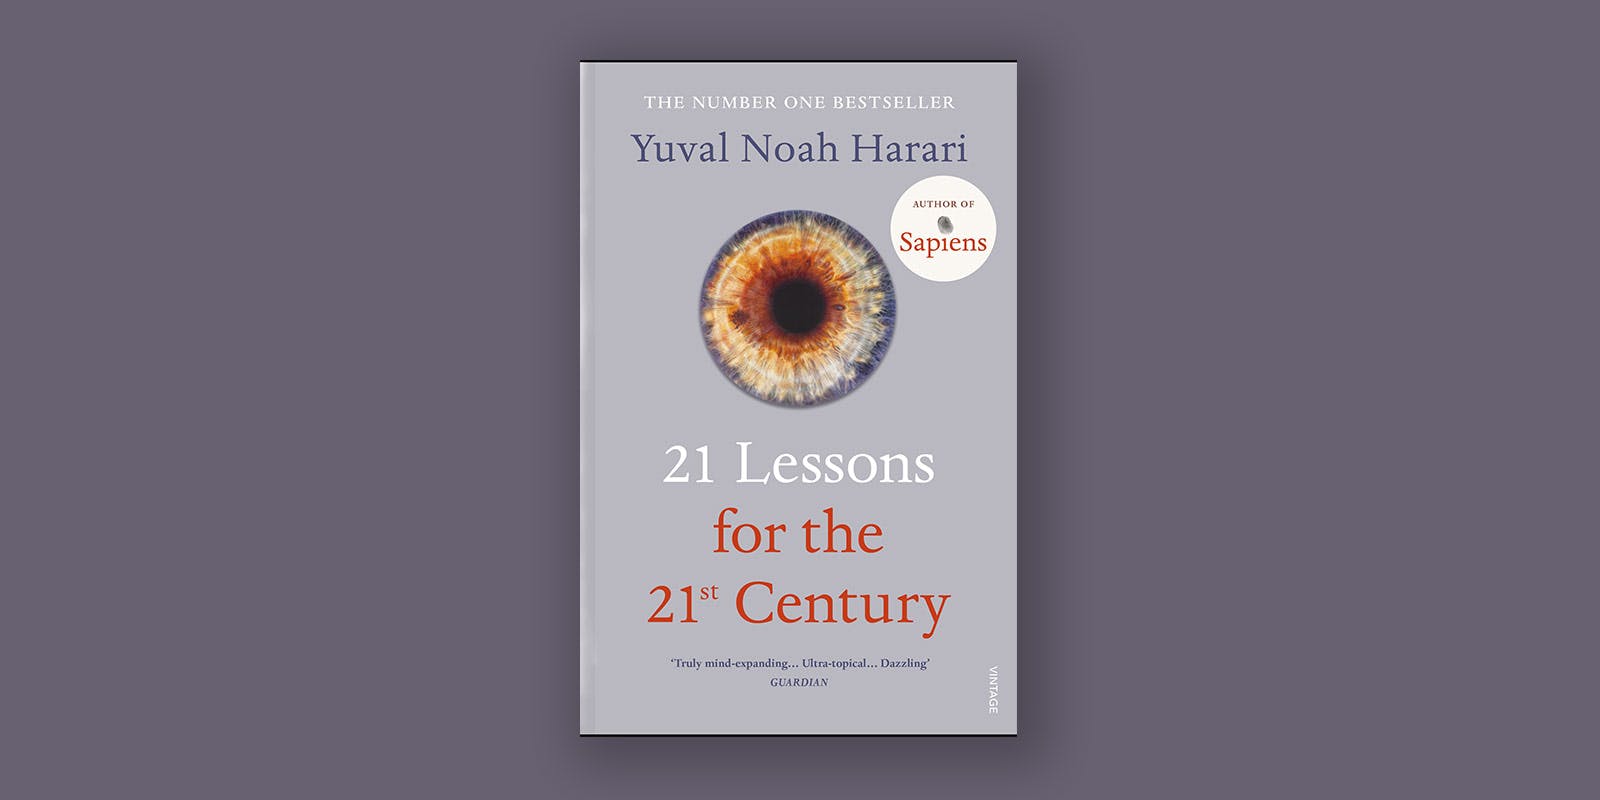 21 Lessons for the 21st Century book club notes